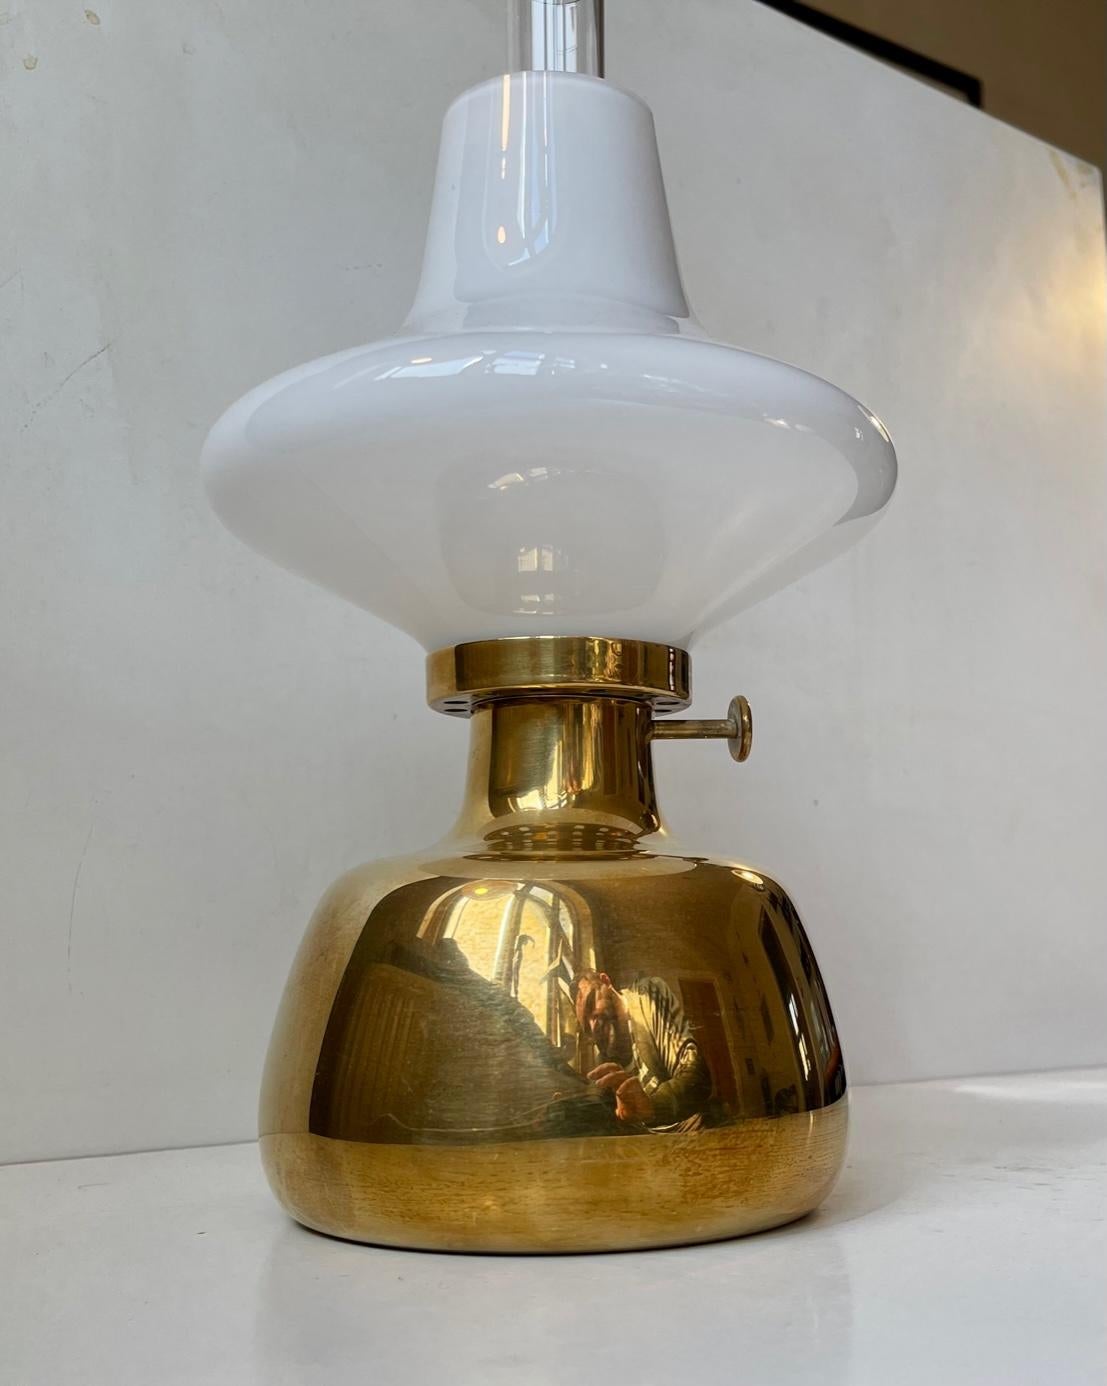 Designed by Henning Koppel (1918-81) and manufactured by Louis Poulsen in the 1980s, the Petronella oil lamp is made from solid brass and has an opaline glass shade. Due to its material composition its very suitable for Maritime - Nautical